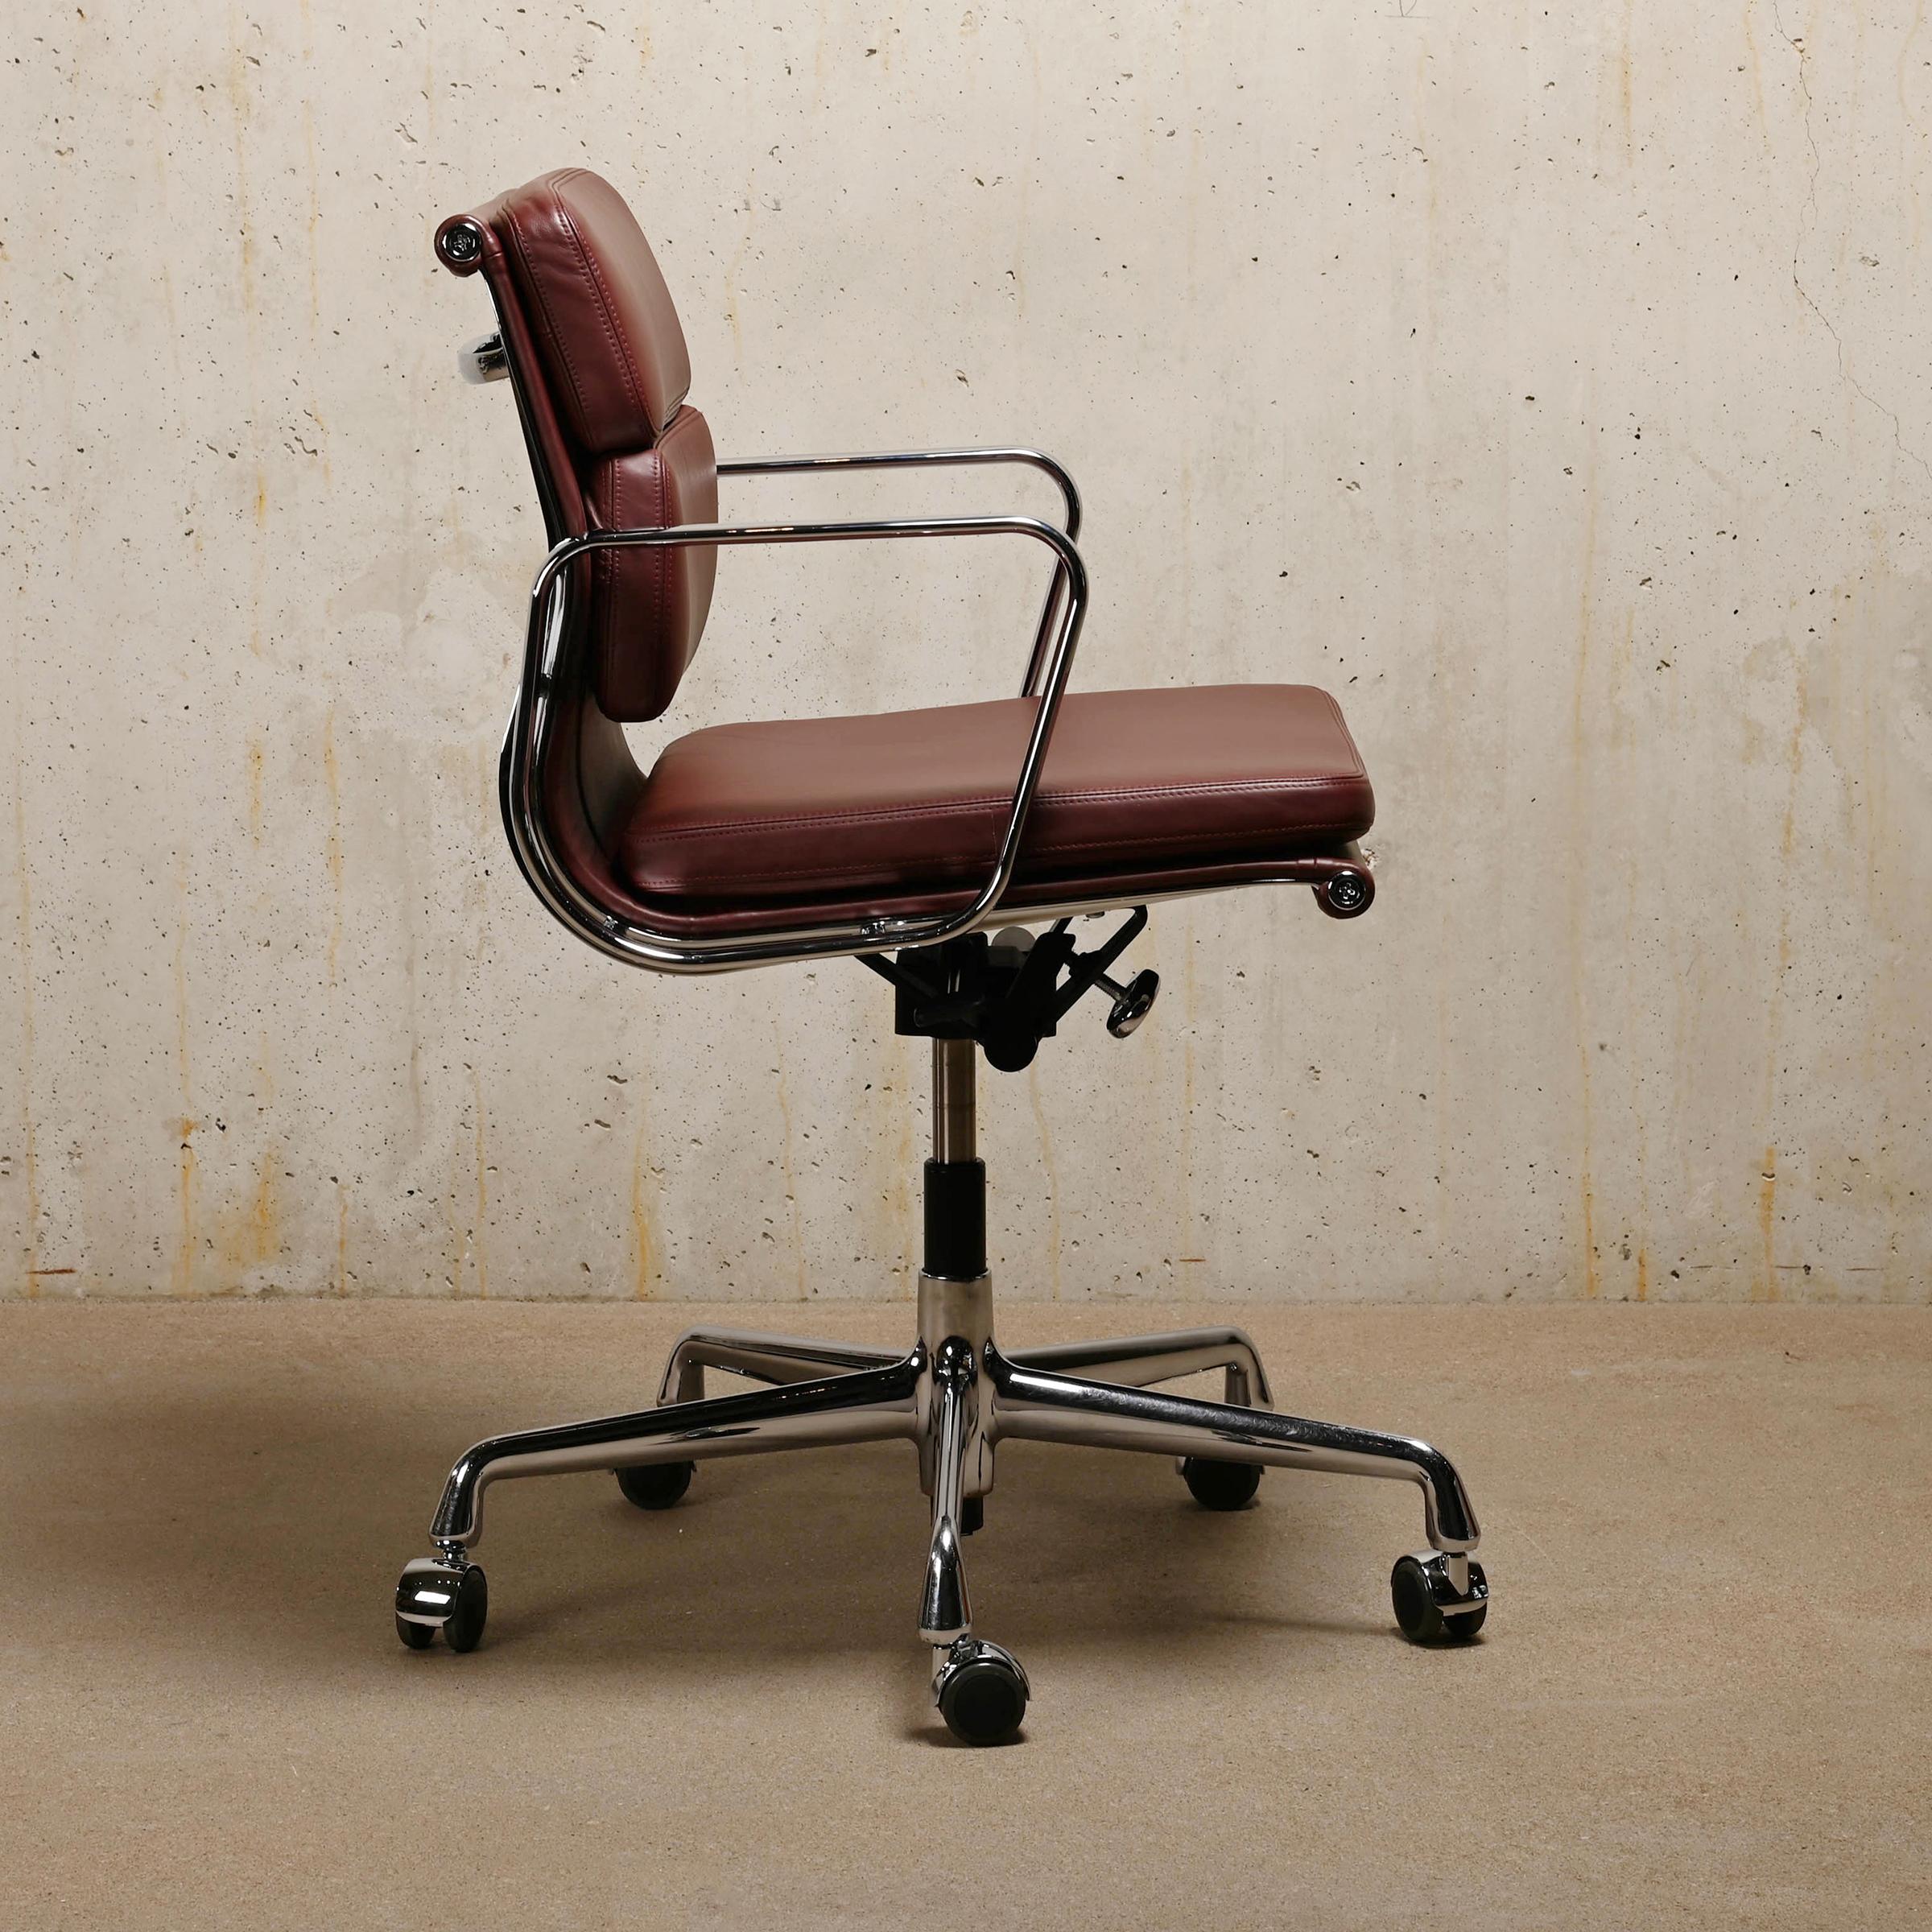 Mid-Century Modern Charles & Ray Eames EA217 Office Chair in Brandy Leather and Chrome, Vitra